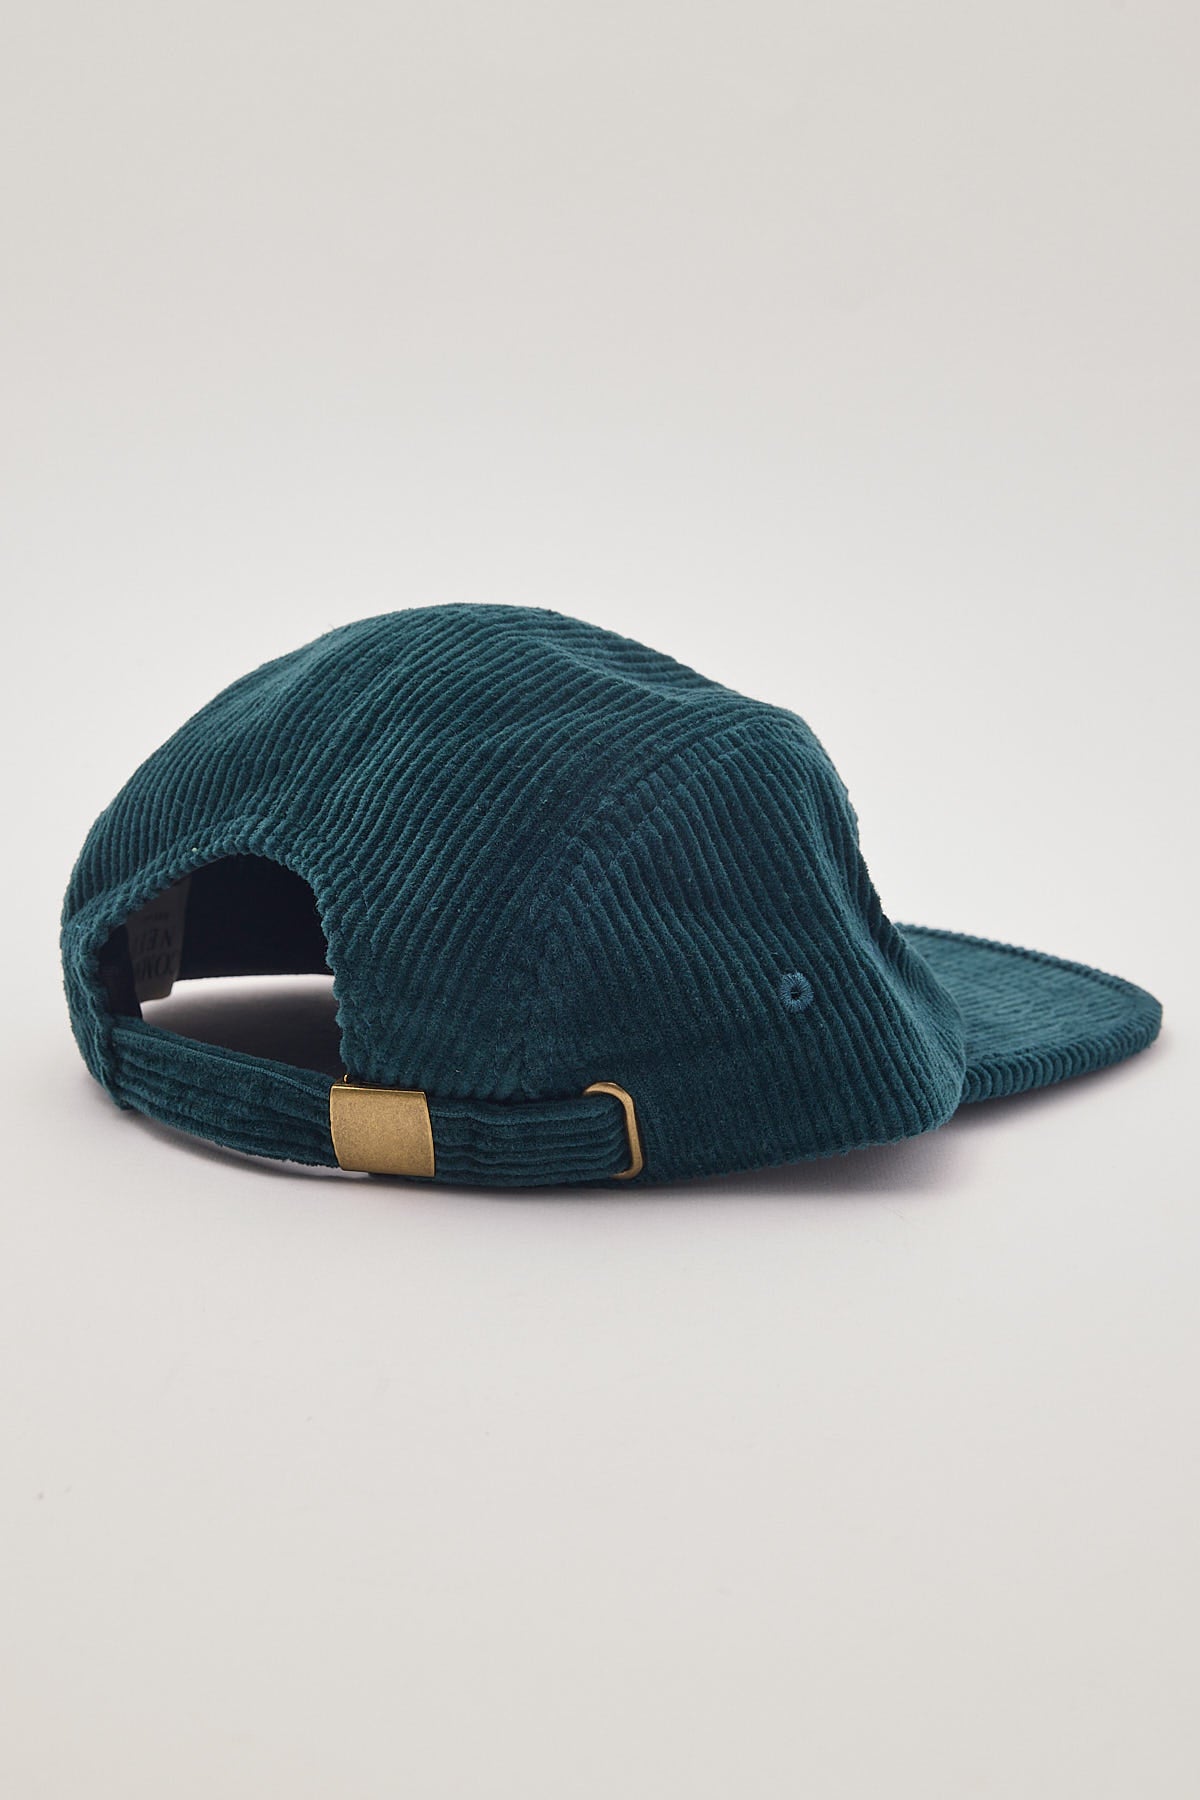 Common Need Aces 5 Panel Cap Teal